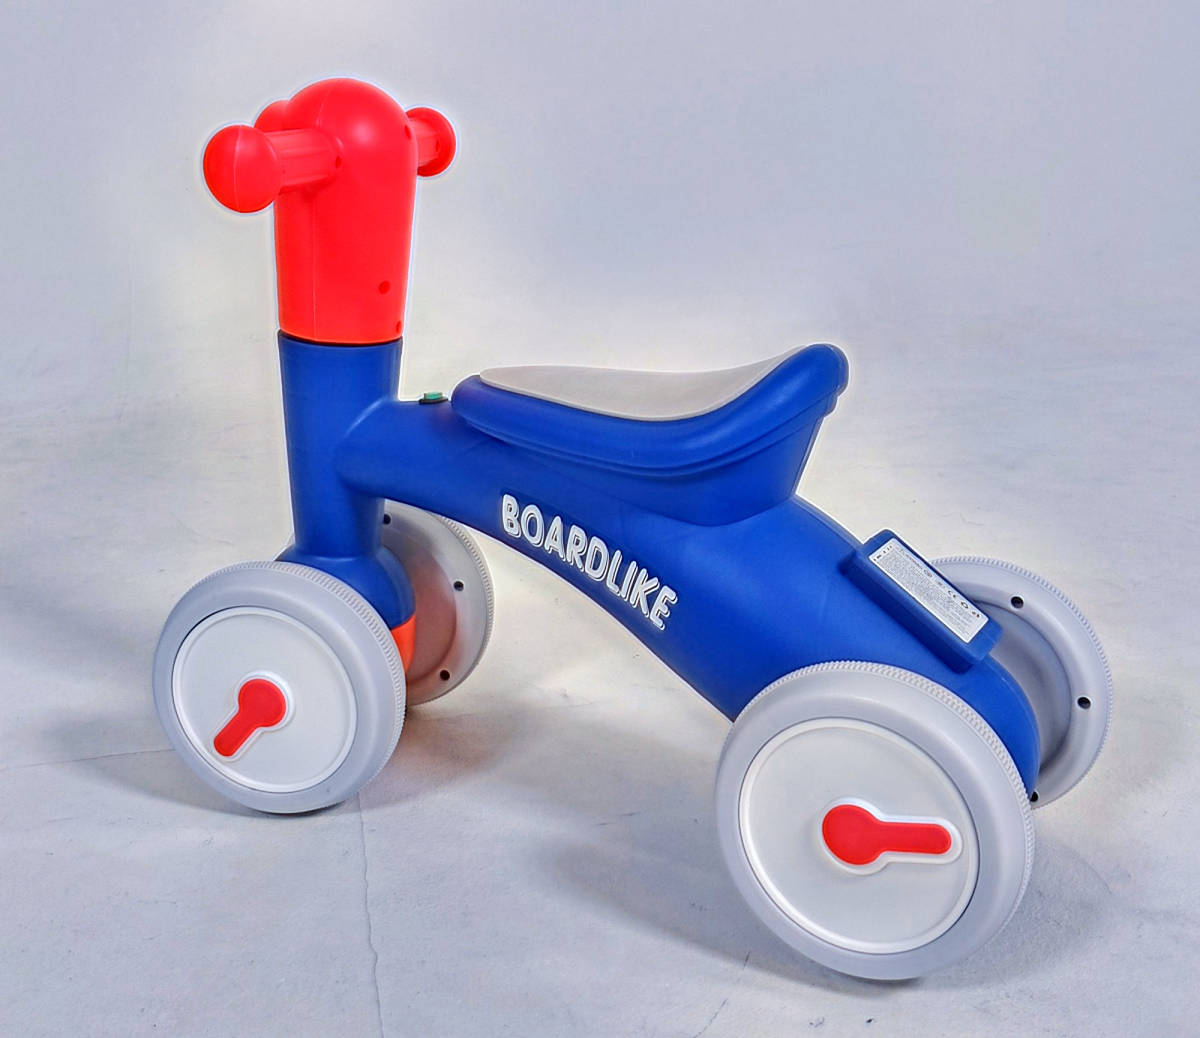 9 blue color #80% off . prompt decision,2WAY# first in Japan # baby-walker # baby War car # board Like # scooter # rocking chair -# wooden horse # handcart 